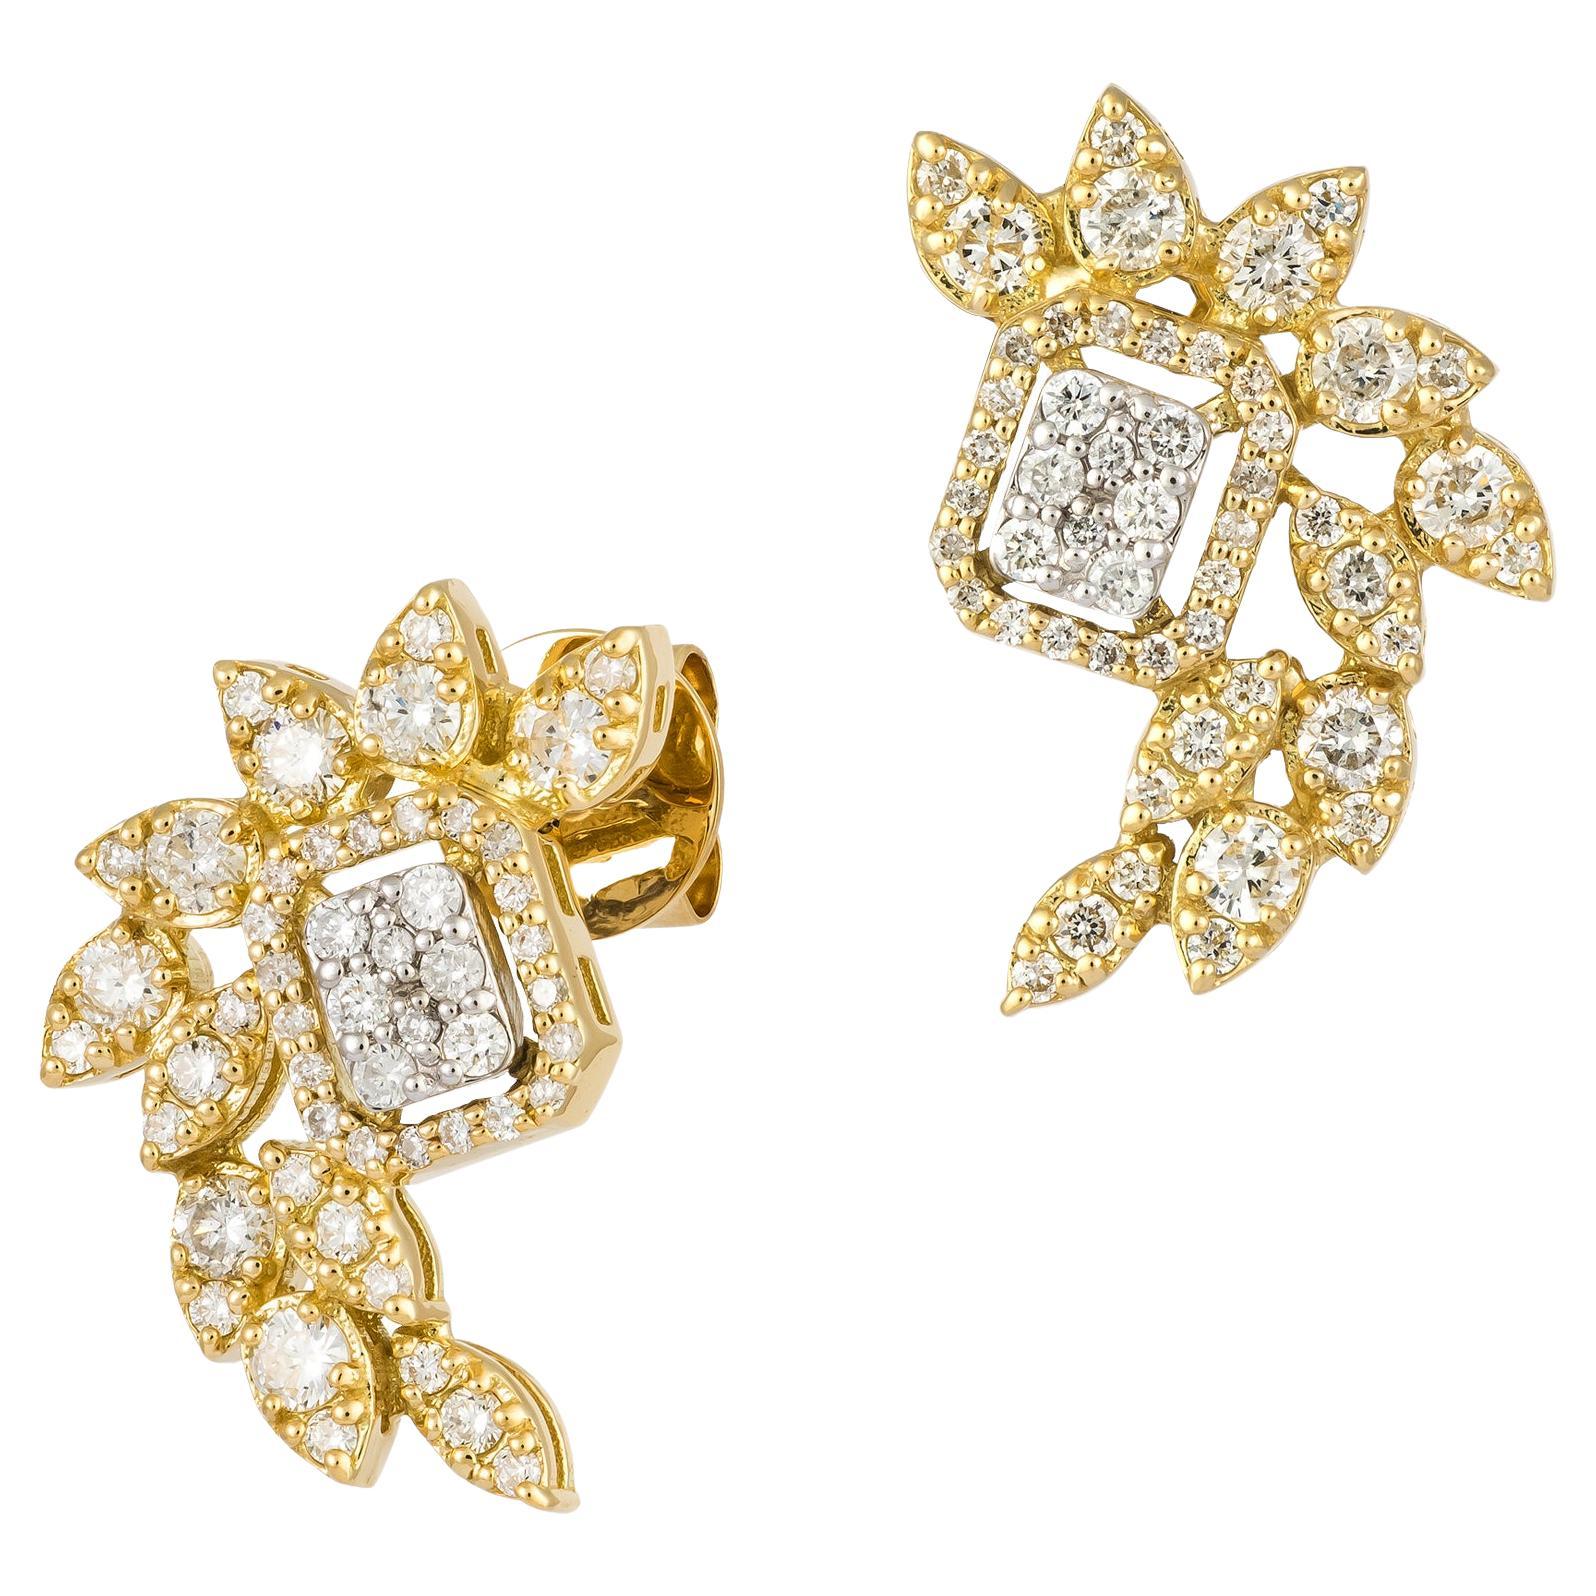 Every Day White Yellow Gold 18K Earrings Diamond For Her For Sale